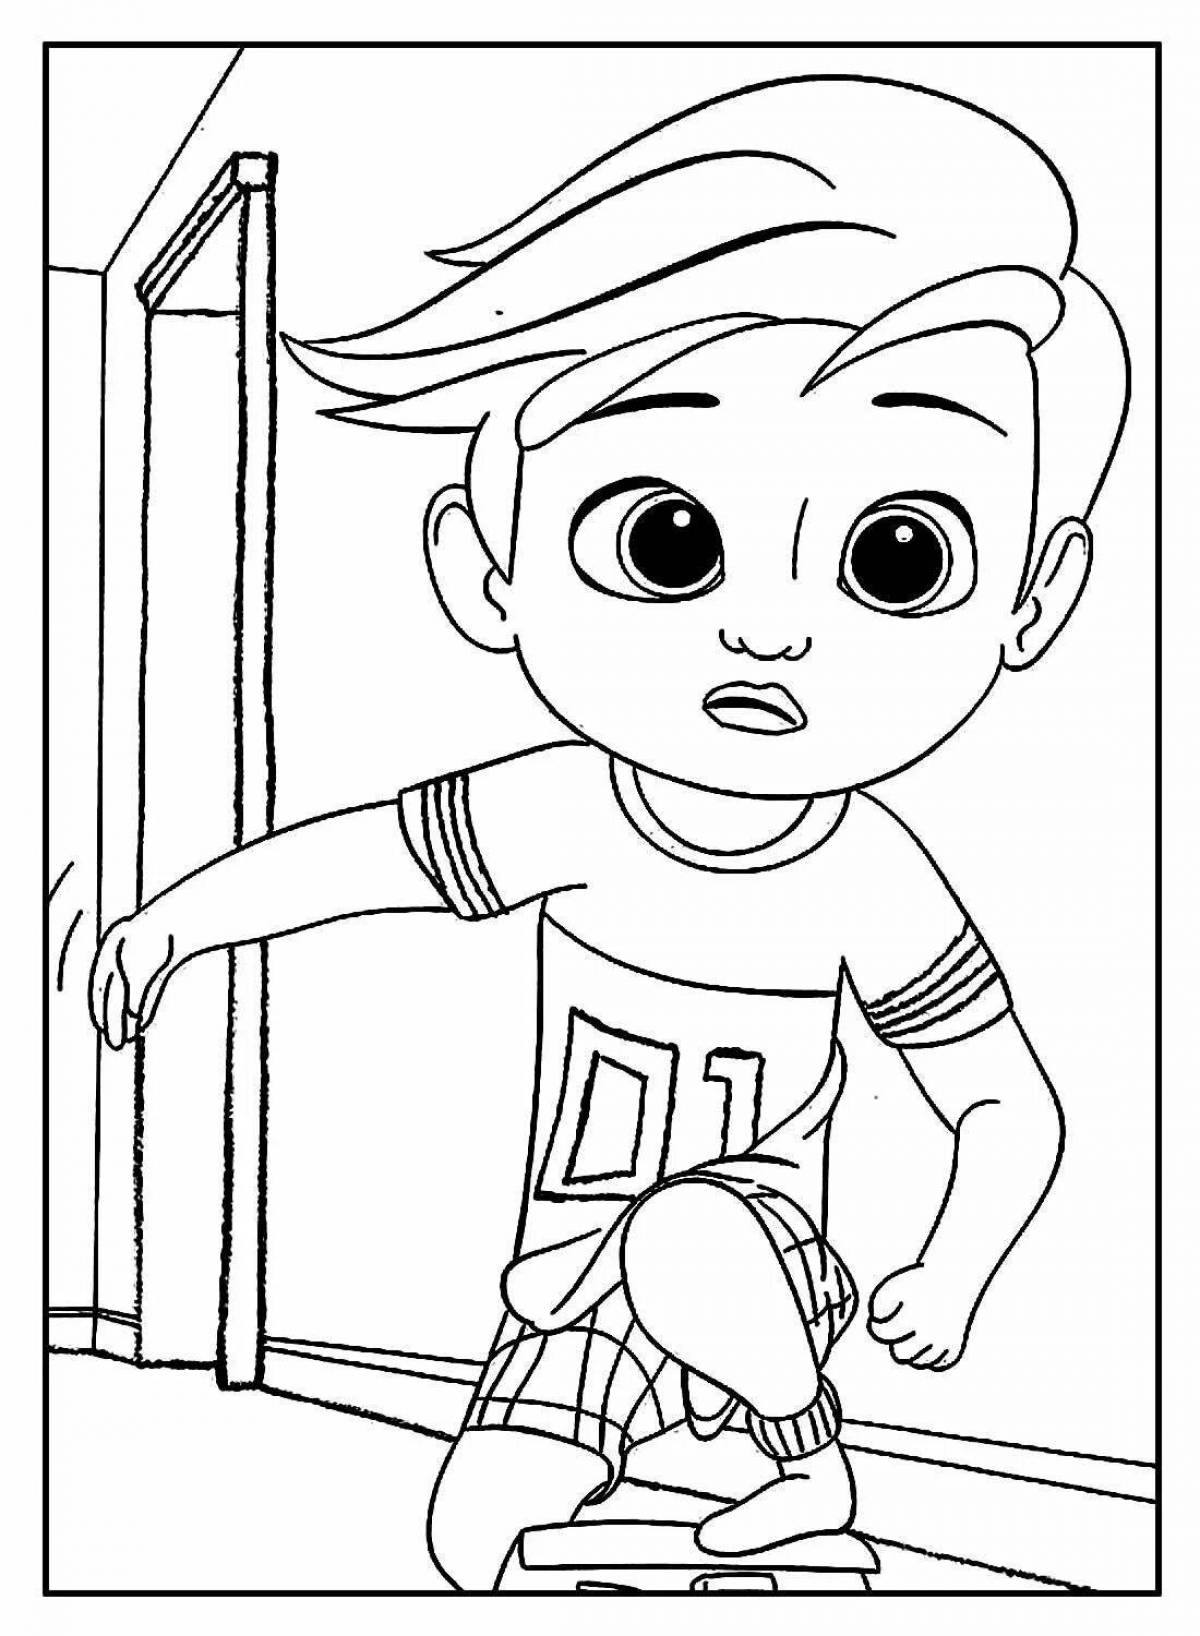 Generous coloring page boss